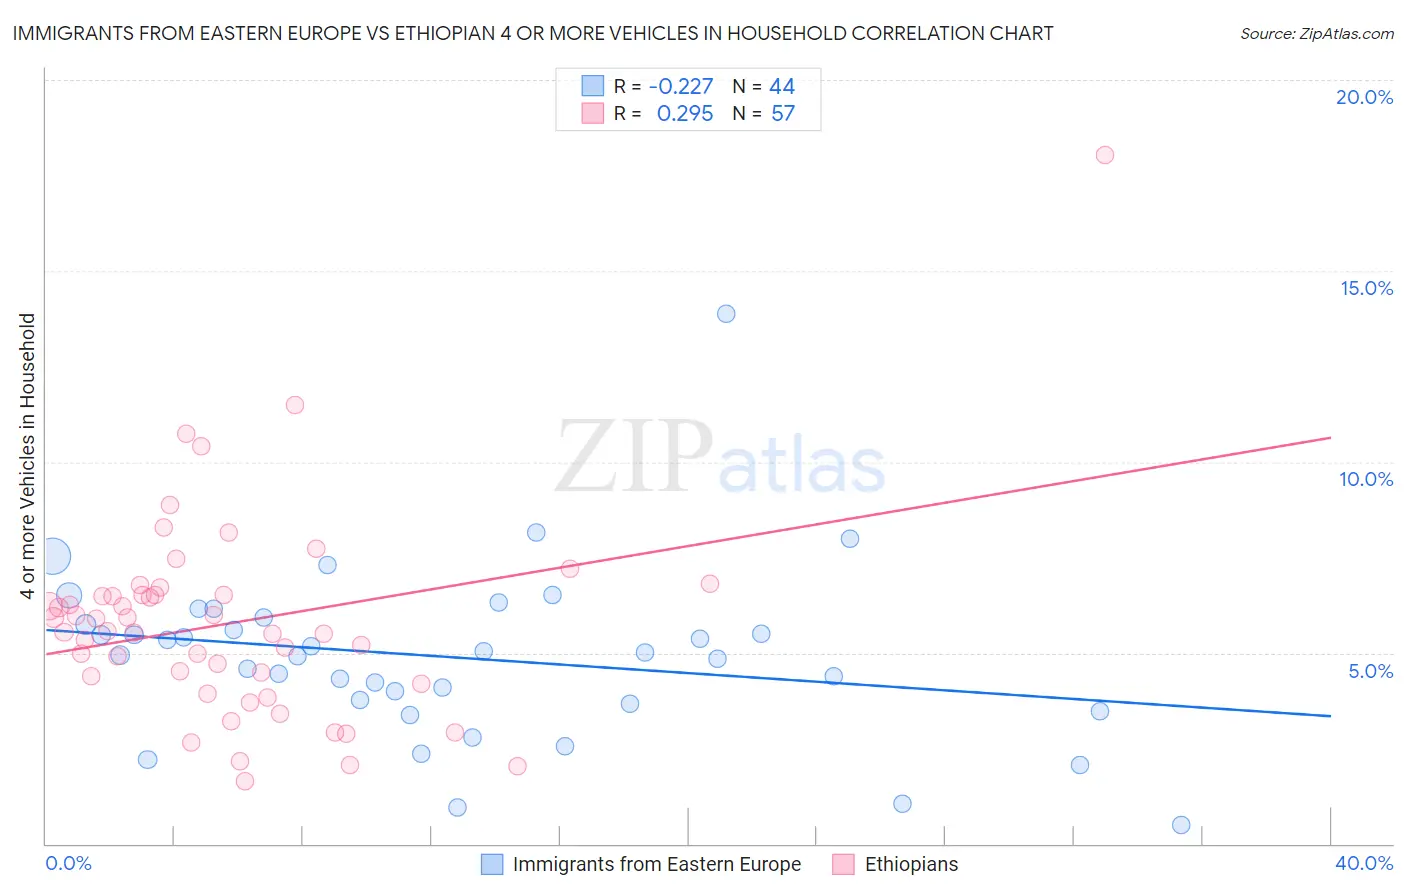 Immigrants from Eastern Europe vs Ethiopian 4 or more Vehicles in Household